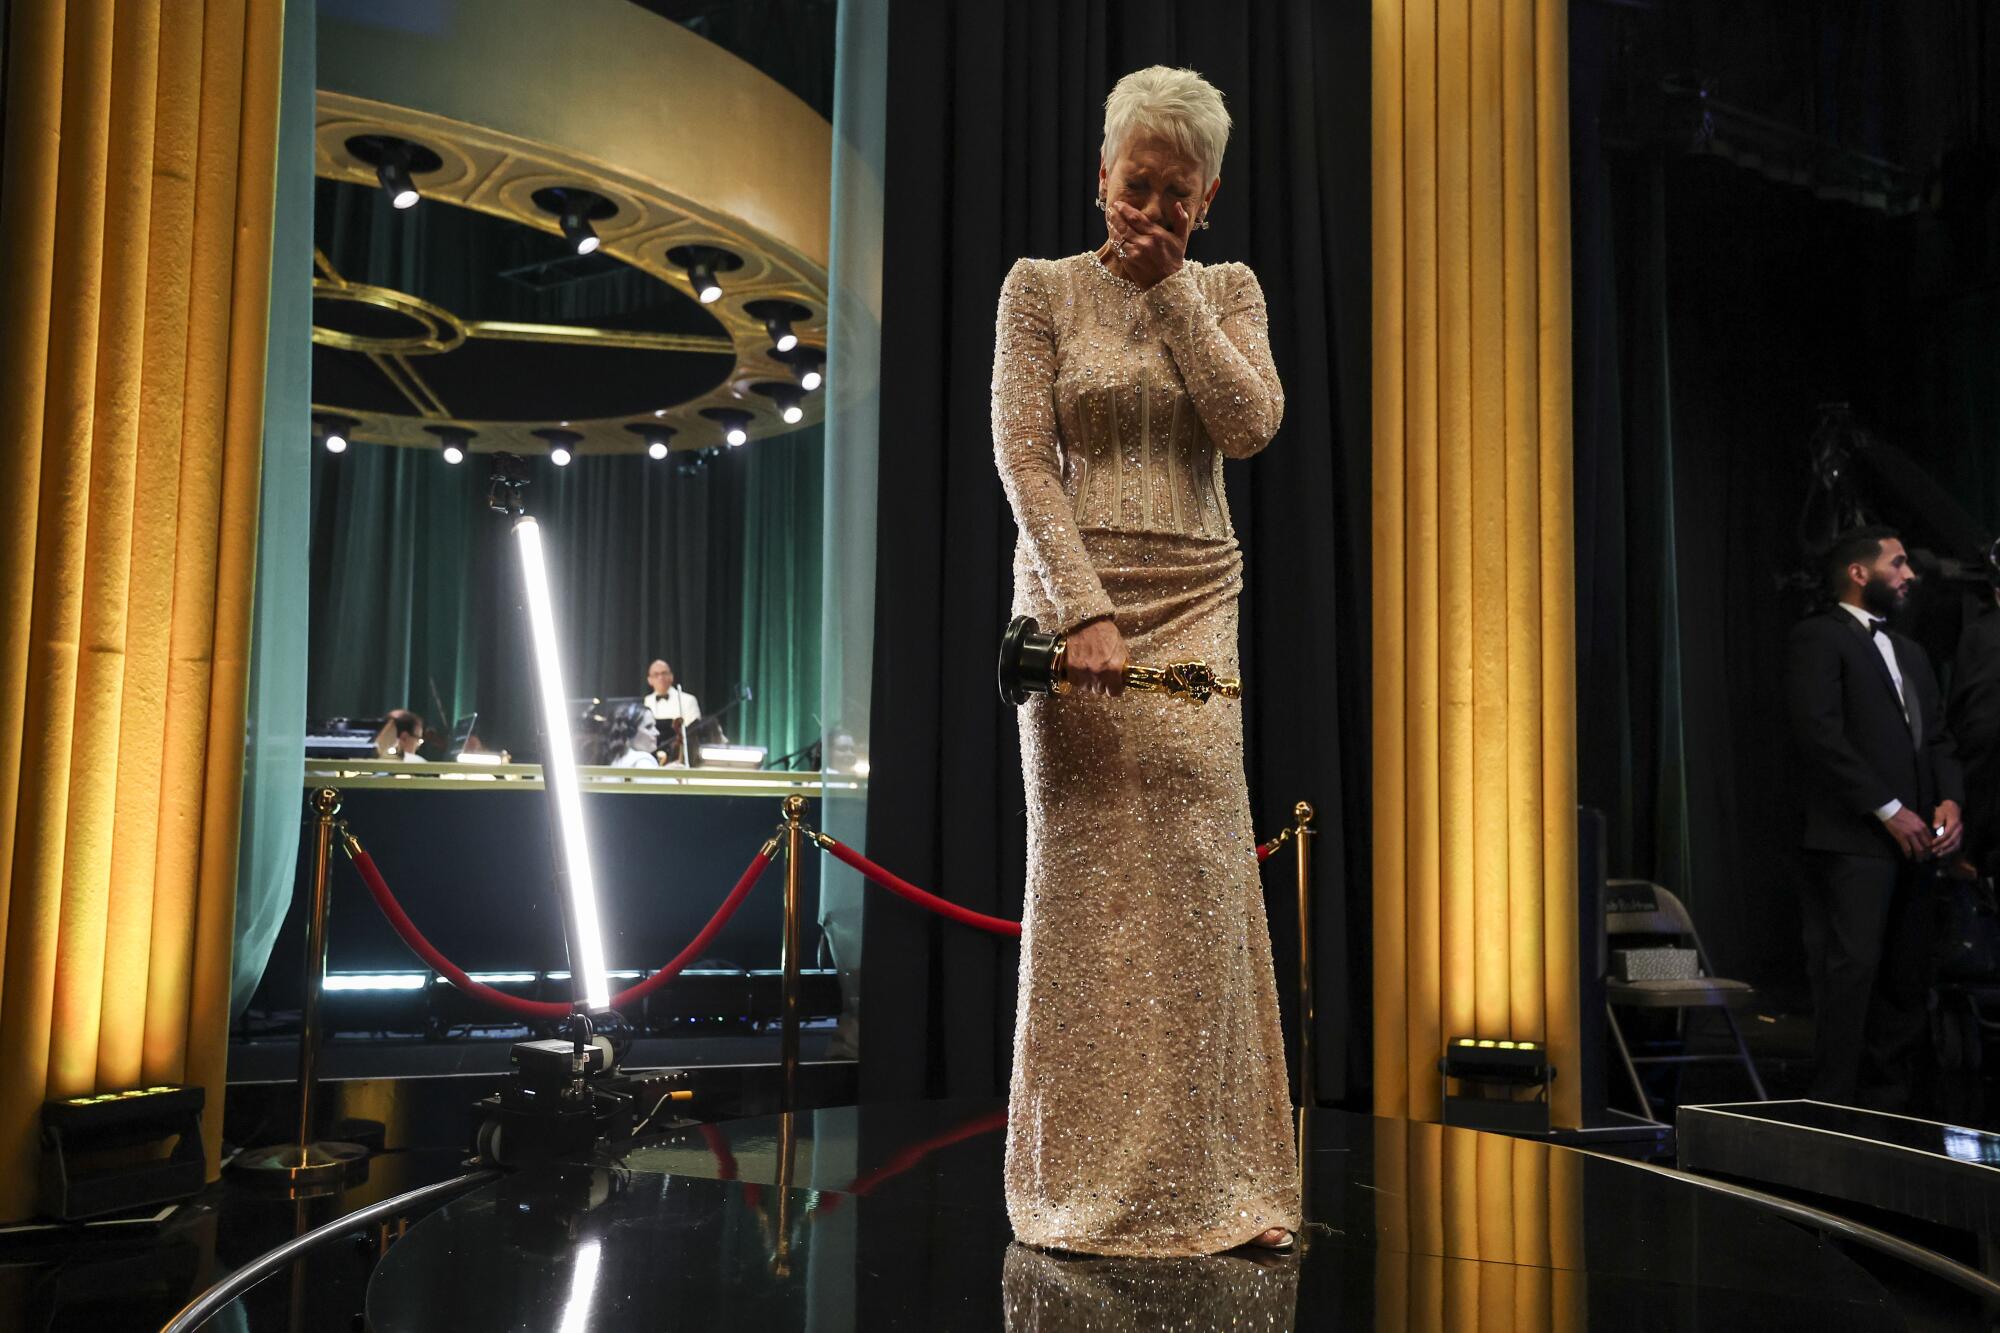 Backstage, a woman in a long gown has one hand on her Oscar statuette and the other hand over her mouth as she cries in joy.